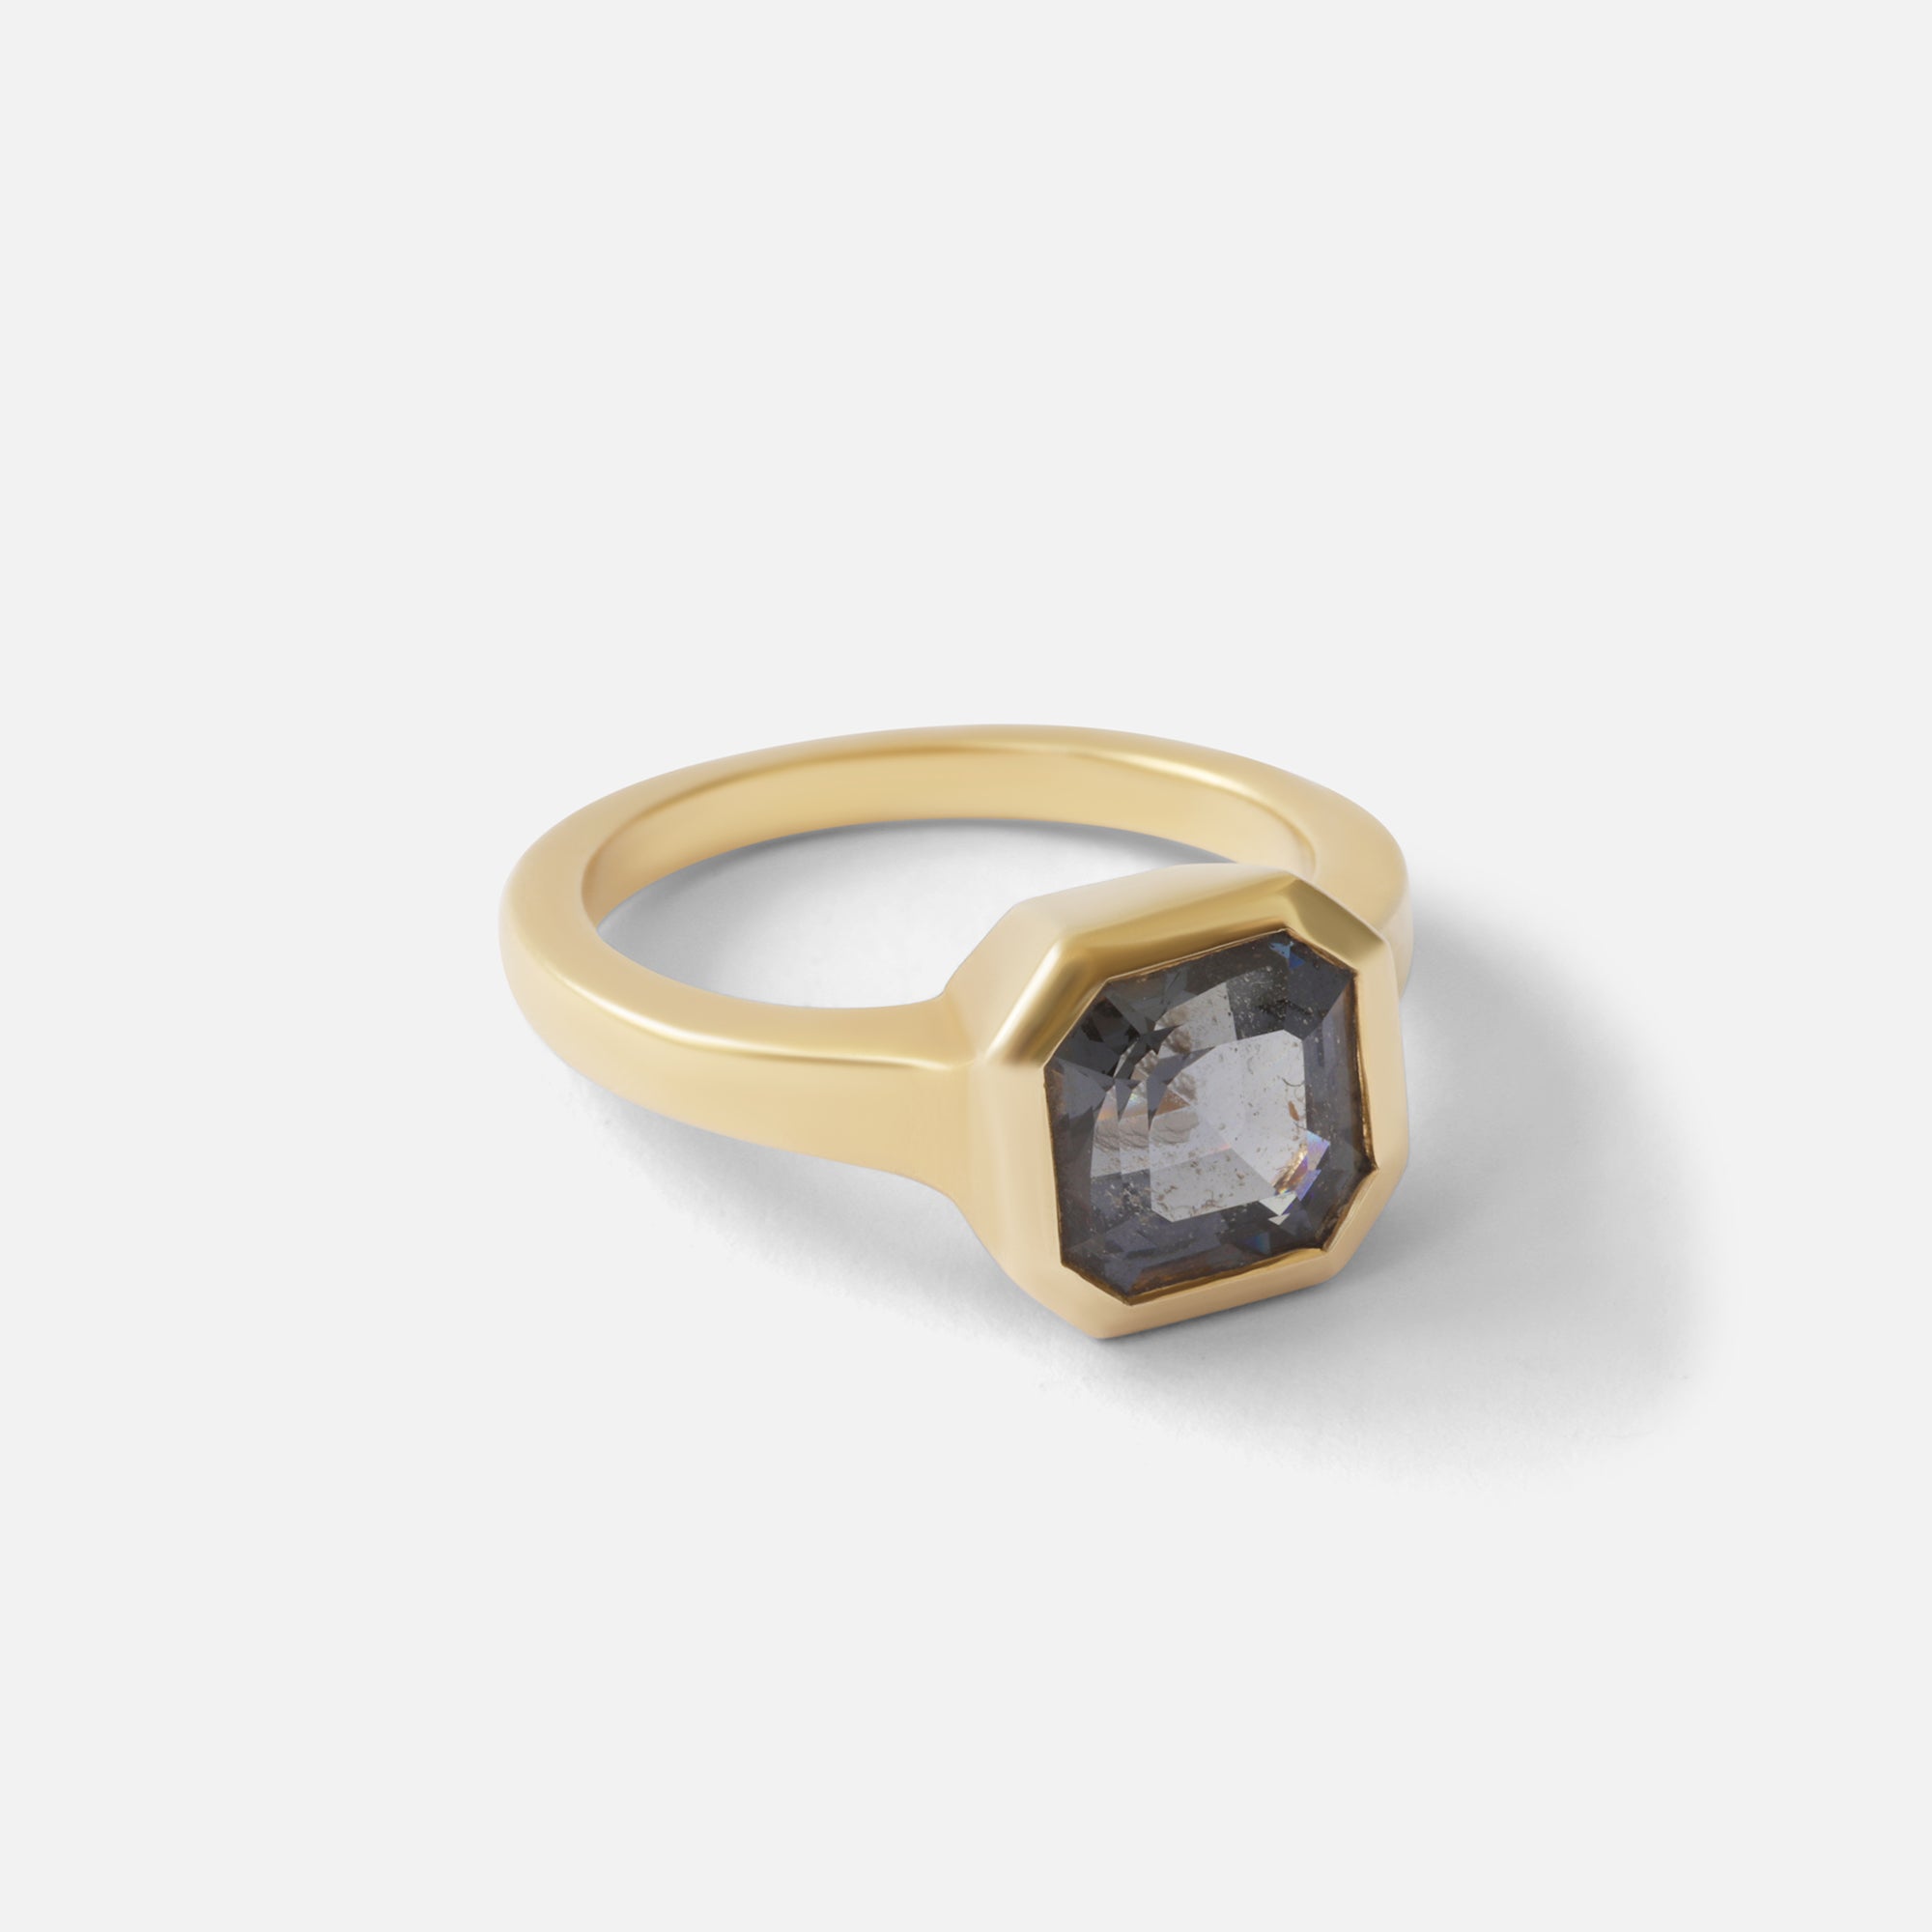 Grey Spinel Ring By Bree Altman in Engagement Rings Category